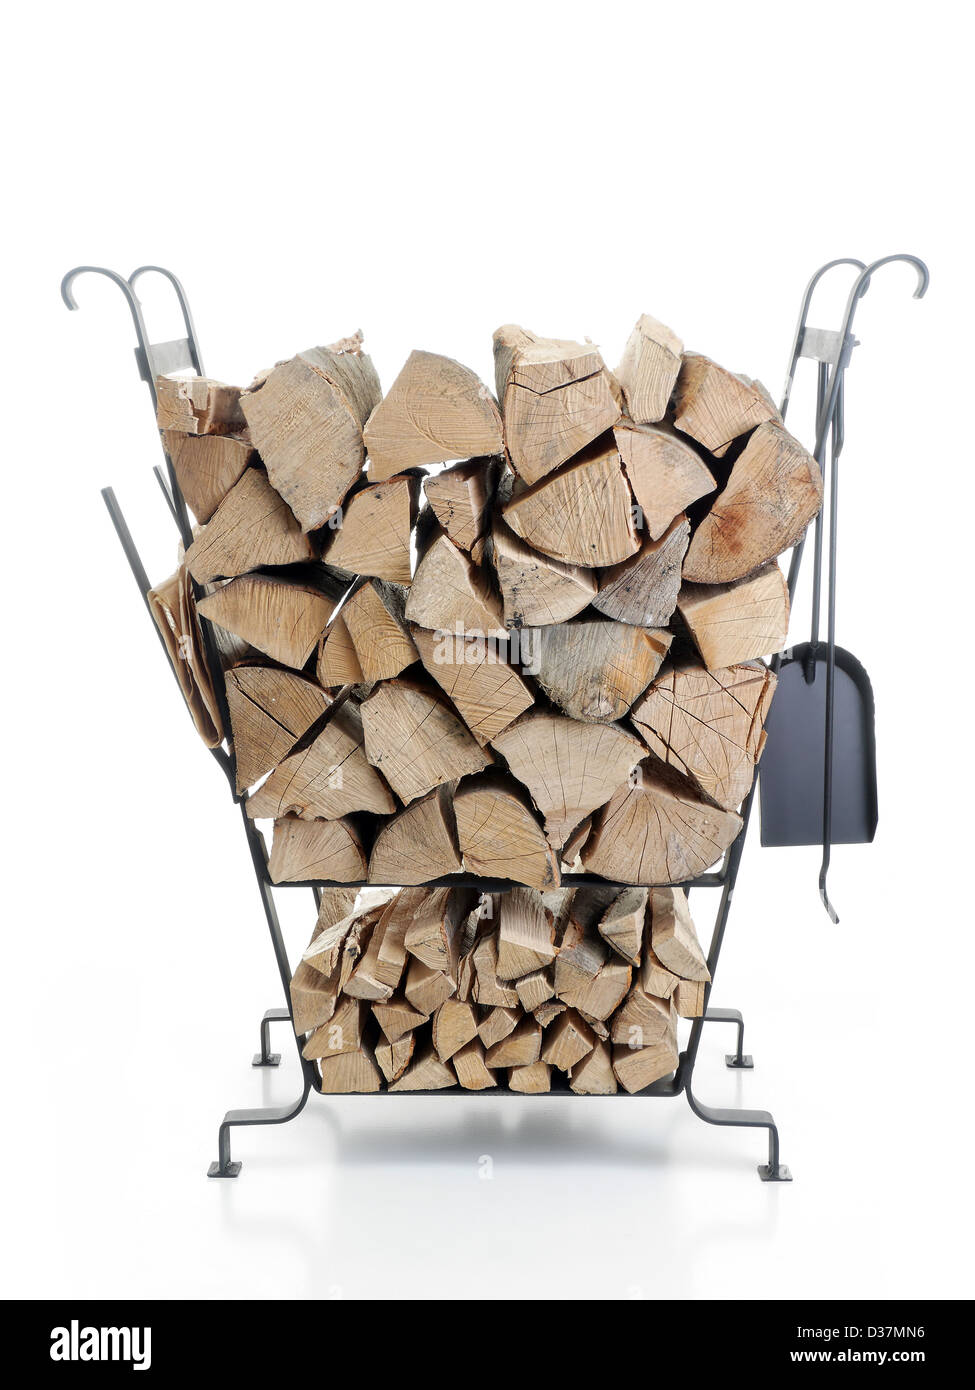 Black firewood metal stand loaded with chopped beechwood logs shot on white background Stock Photo